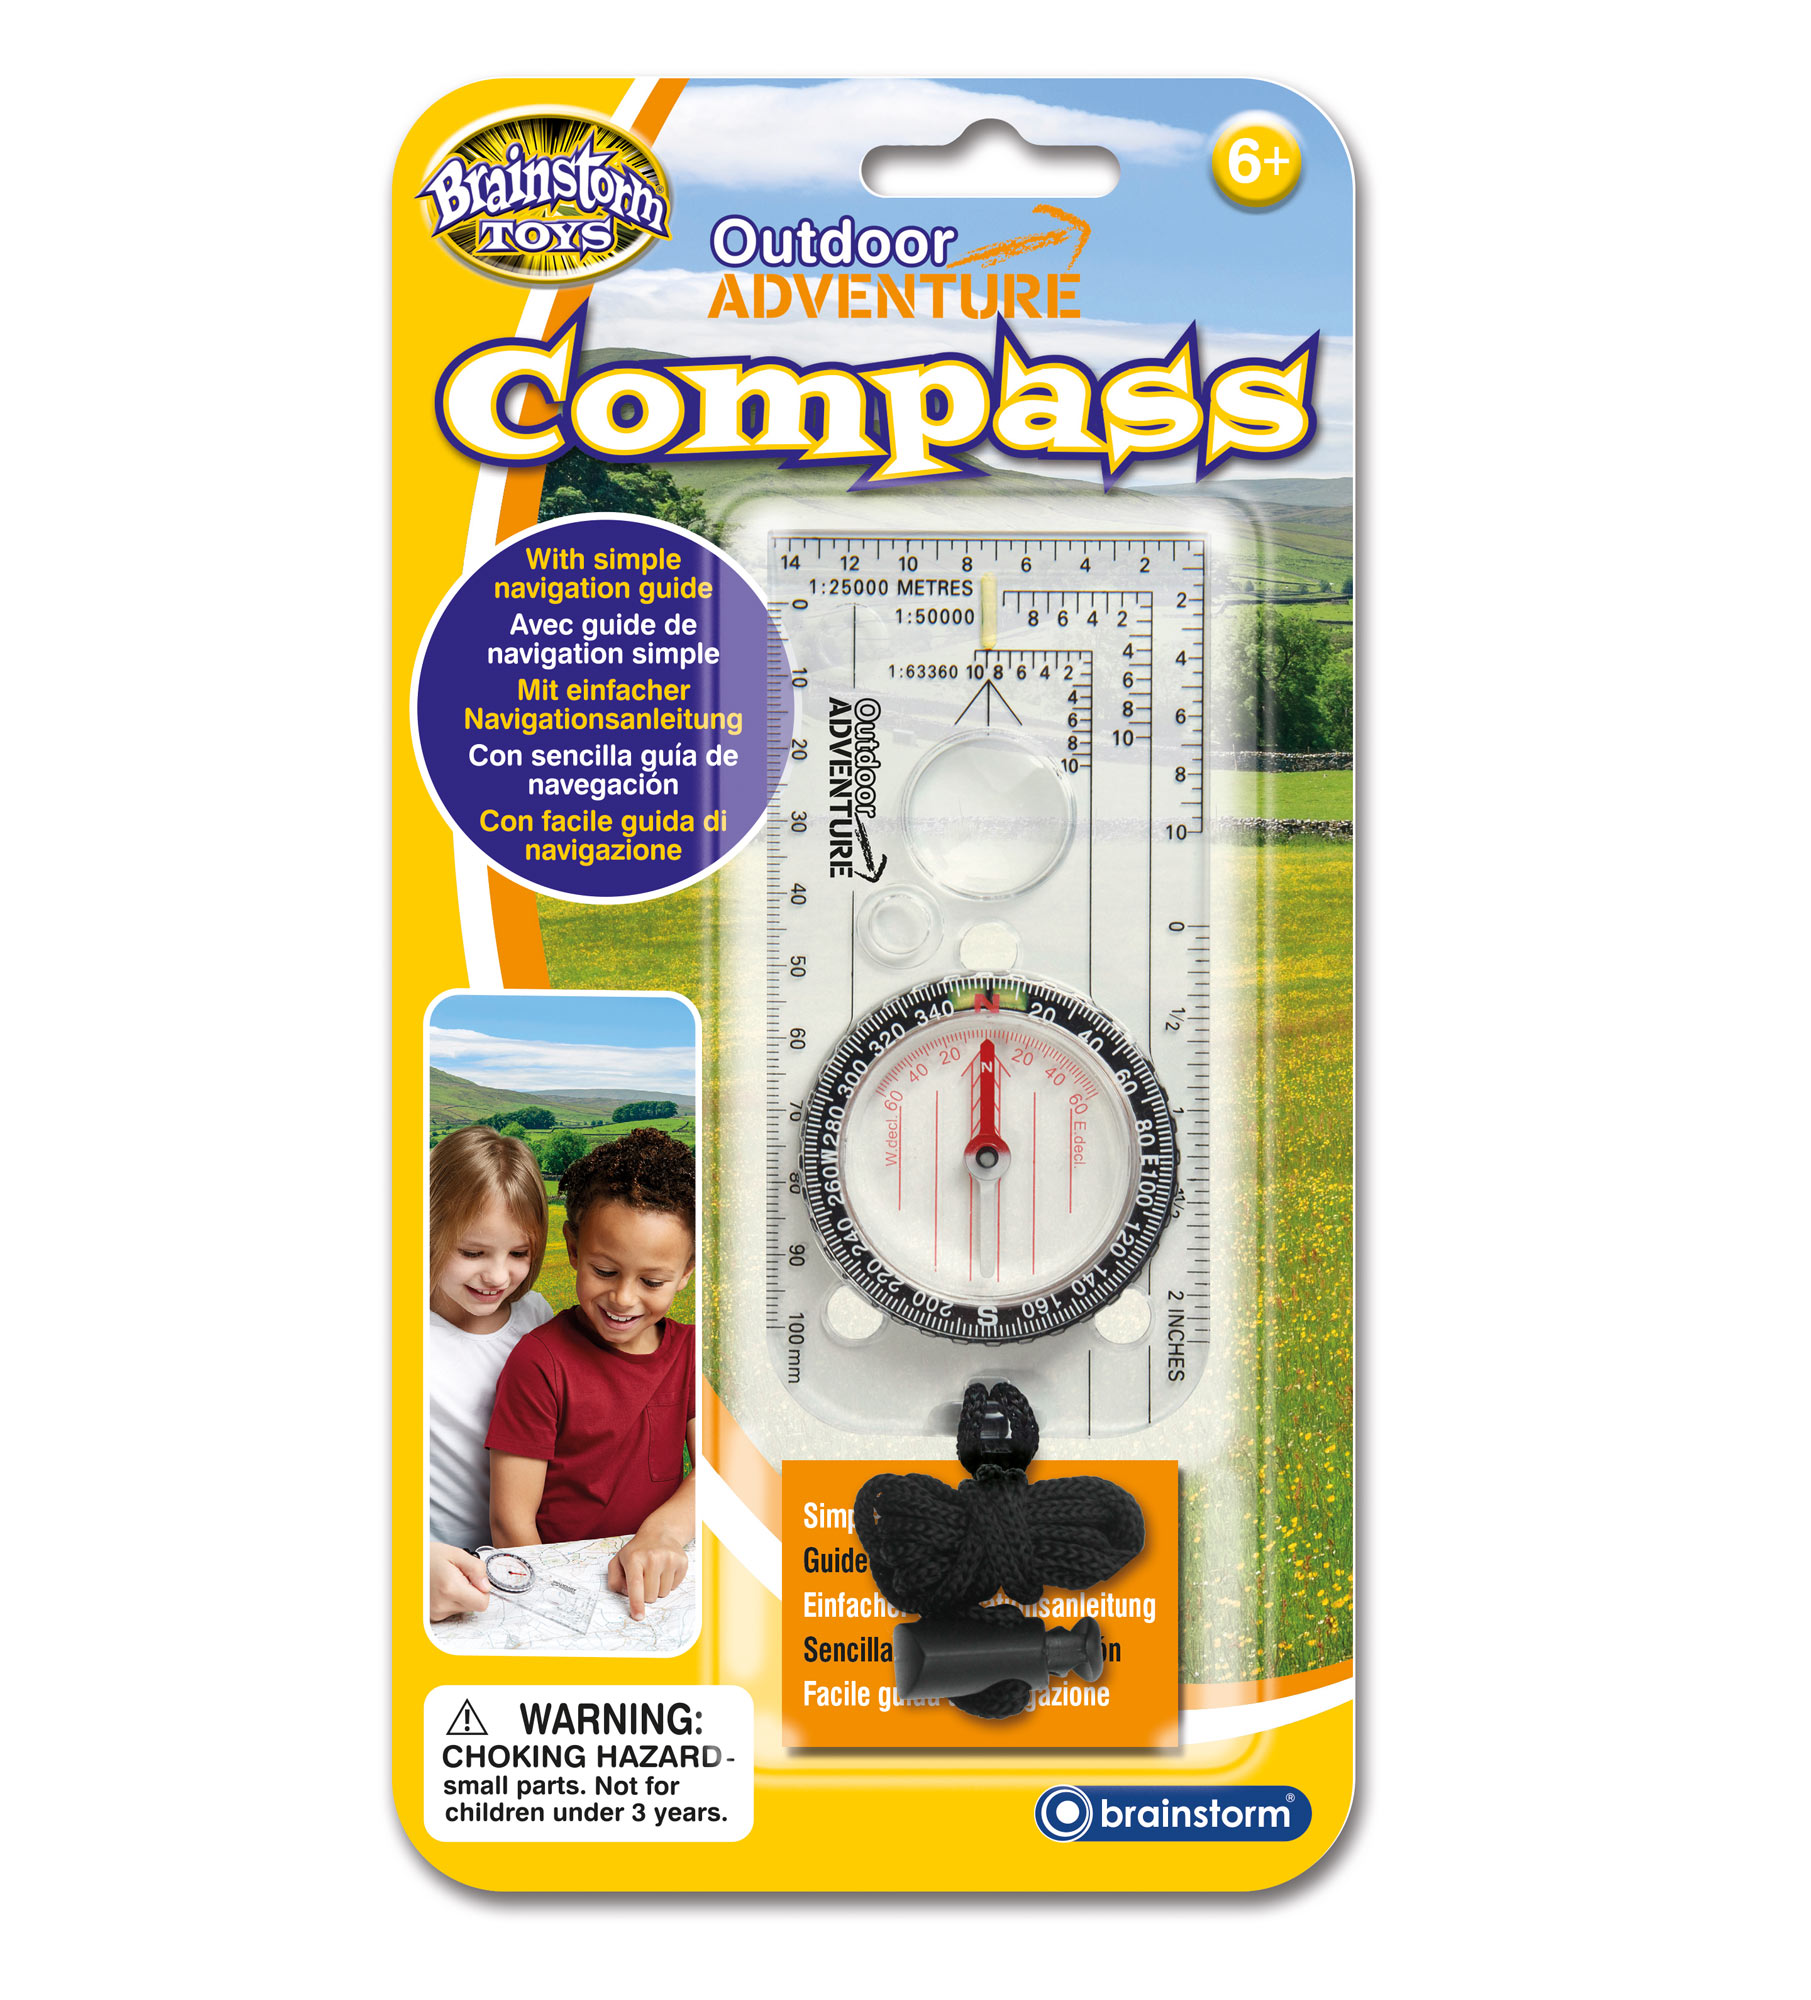 Children's Compasses for Camping Break-Away Neon Lanyard Hiking and Exploring Sun Company Wildlife Compass for Kids 